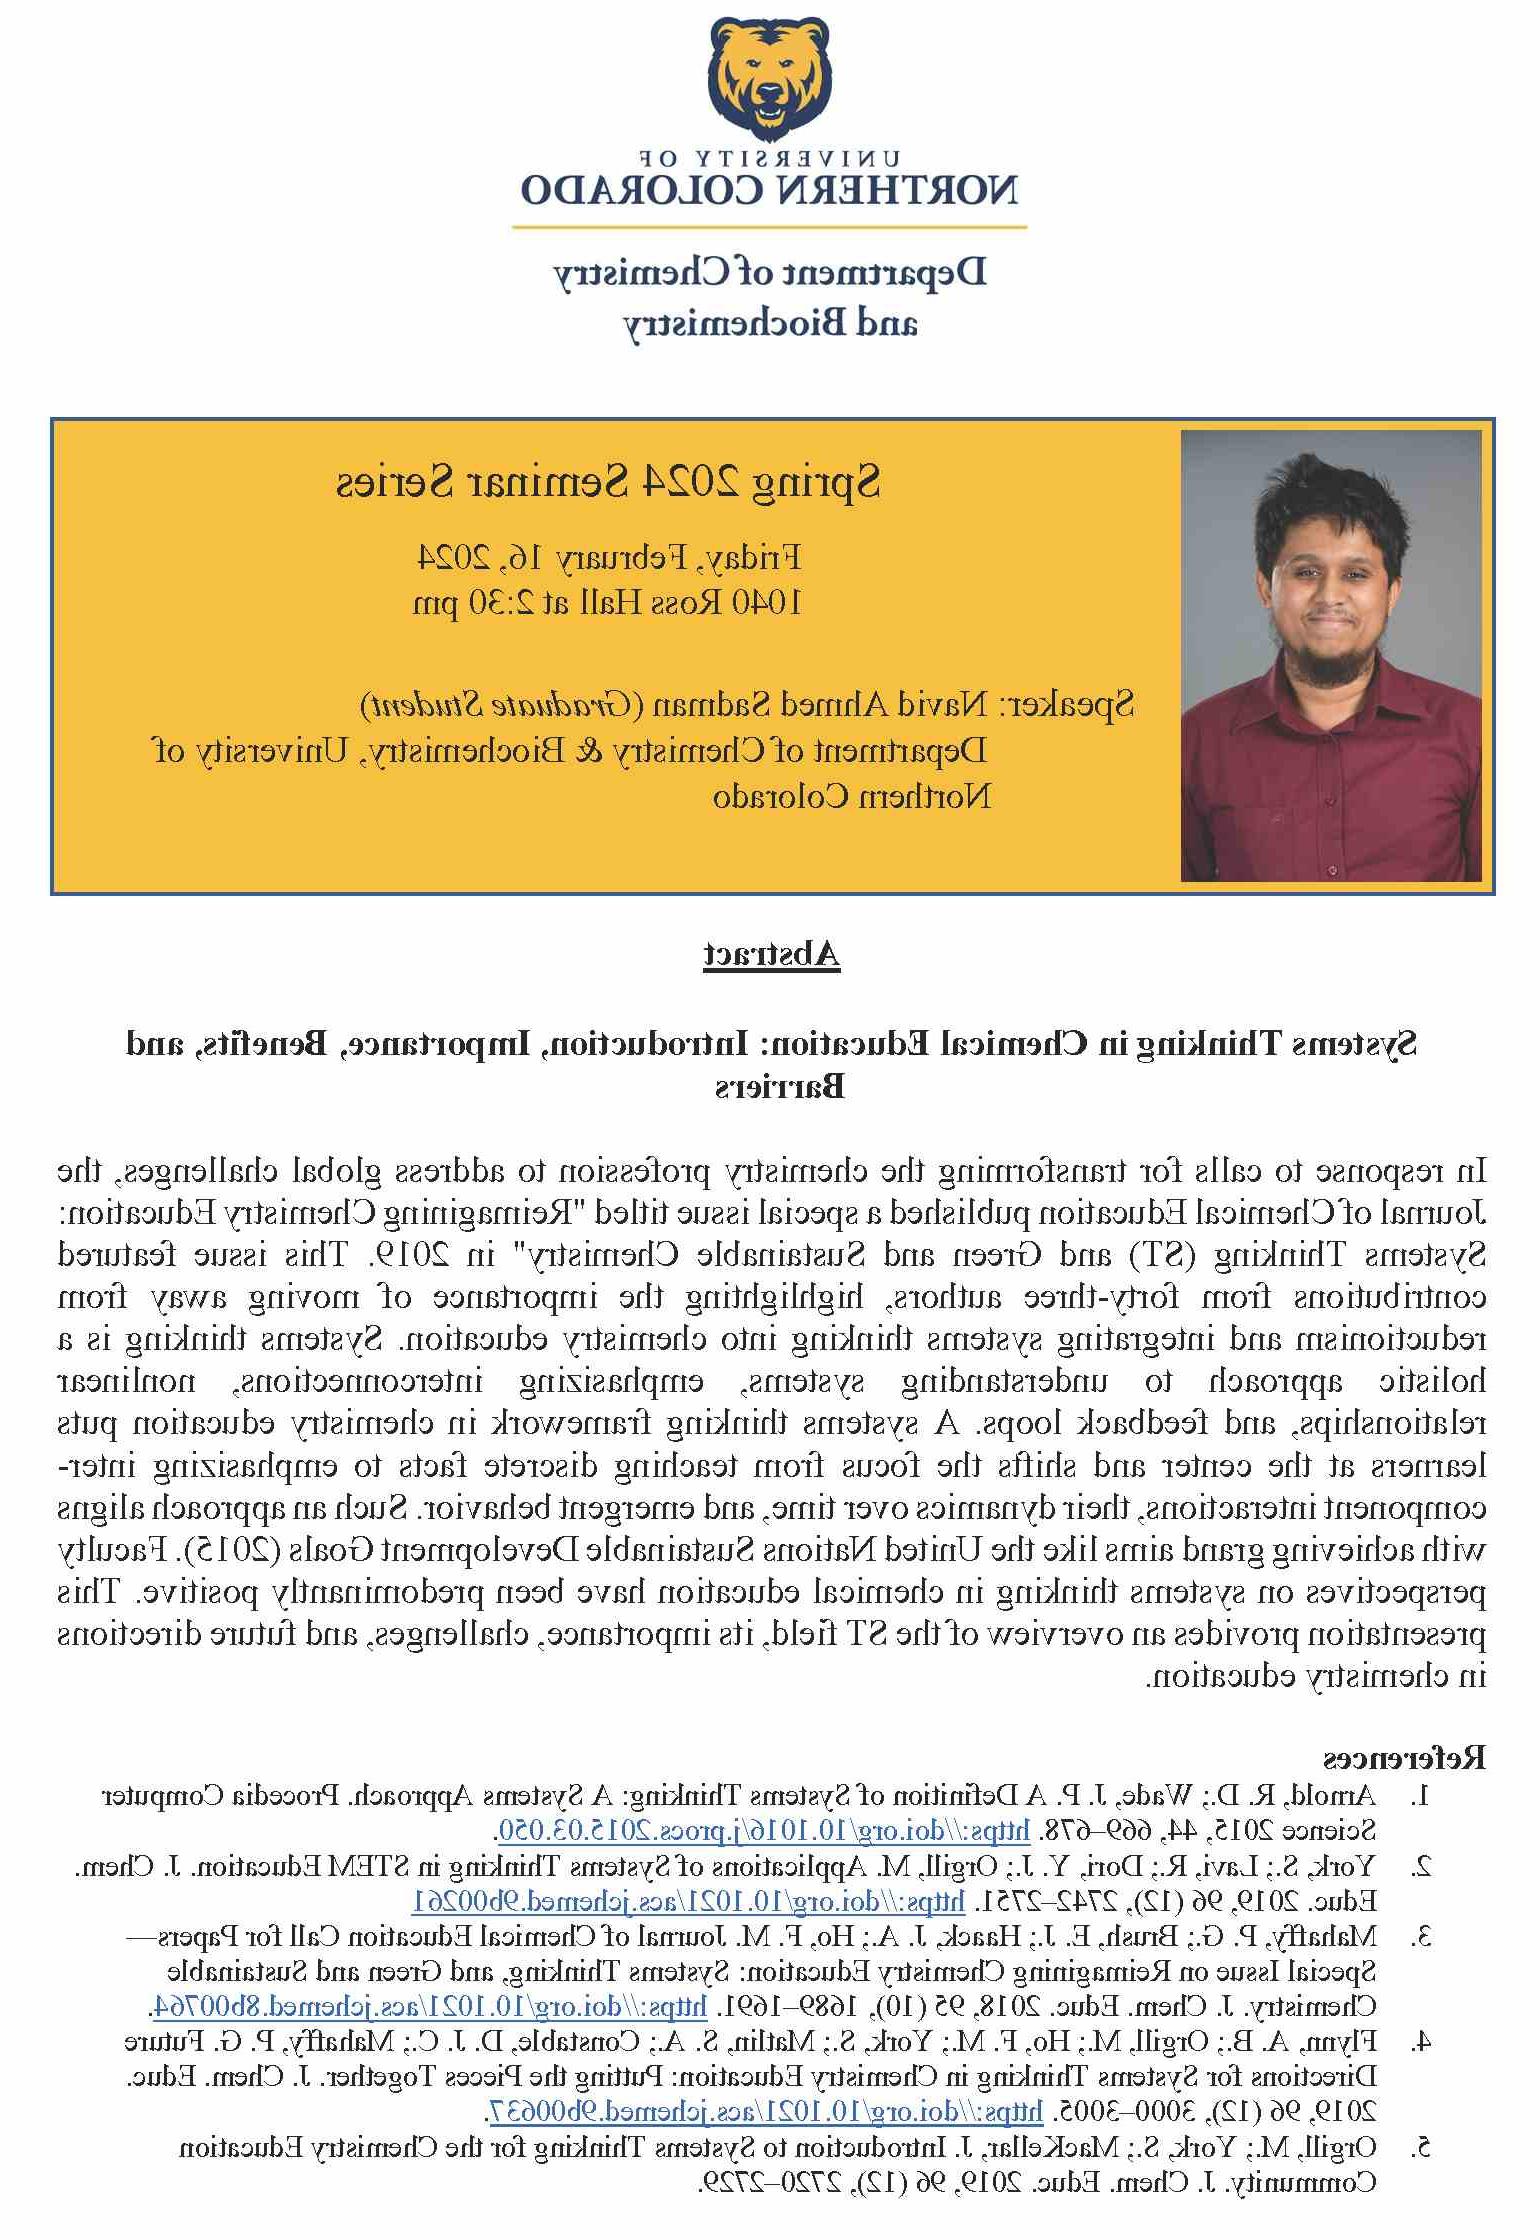 Navid Ahmed Sadman stands in front of a gray background wearing a red shirt. The image includes details for his seminar presentation on Systems Thinking in Chemical Education